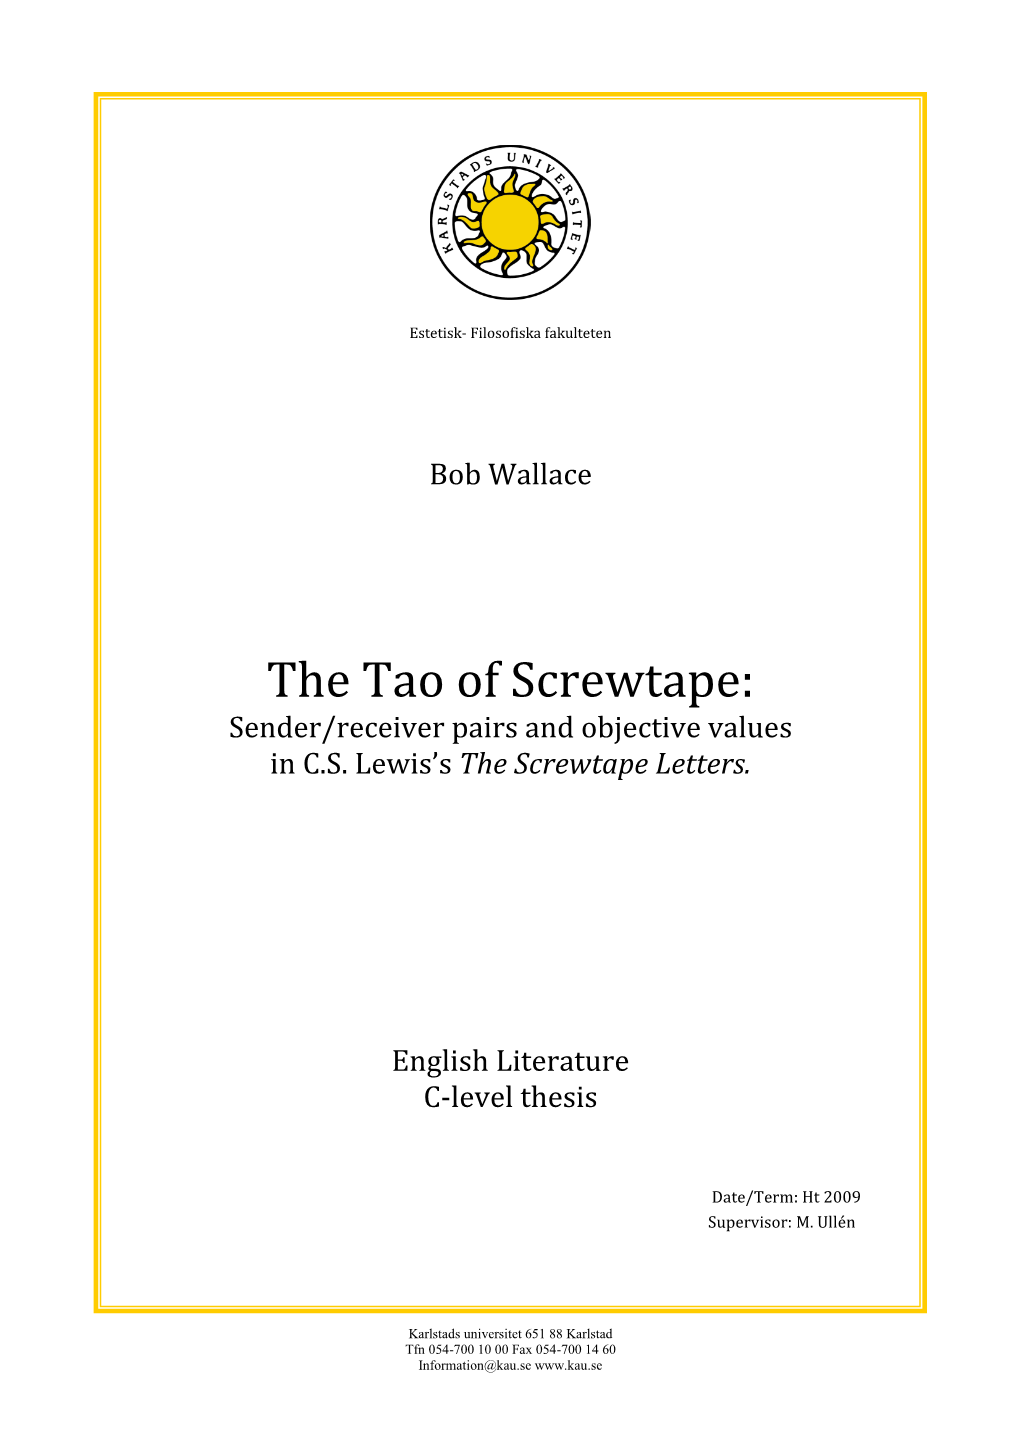 The Tao of Screwtape: Sender/Receiver Pairs and Objective Values in C.S